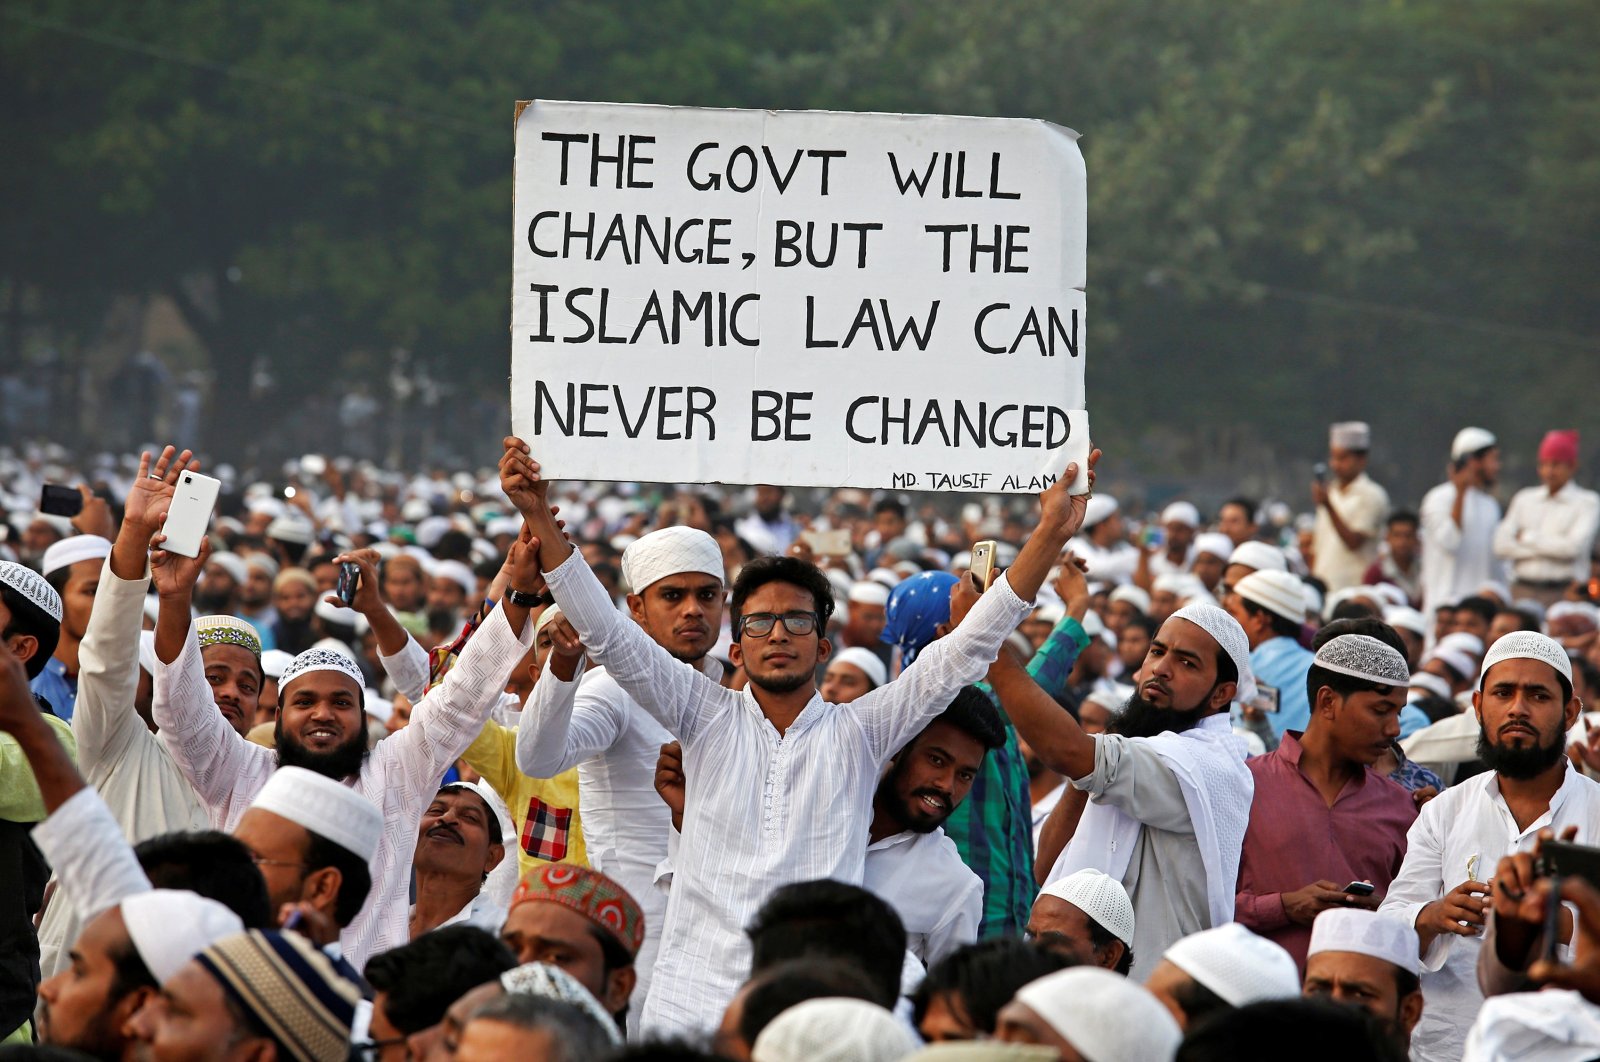 A man holds a banner during a rally organized by All India Muslim Personal Law Board (AIMPLB), in support of the Muslim Personal Law against what they say is the central government&#039;s move to change it and impose the Uniform Civil Code across the country, in Kolkata, India, Nov. 20, 2016. (Reuters File Photo)